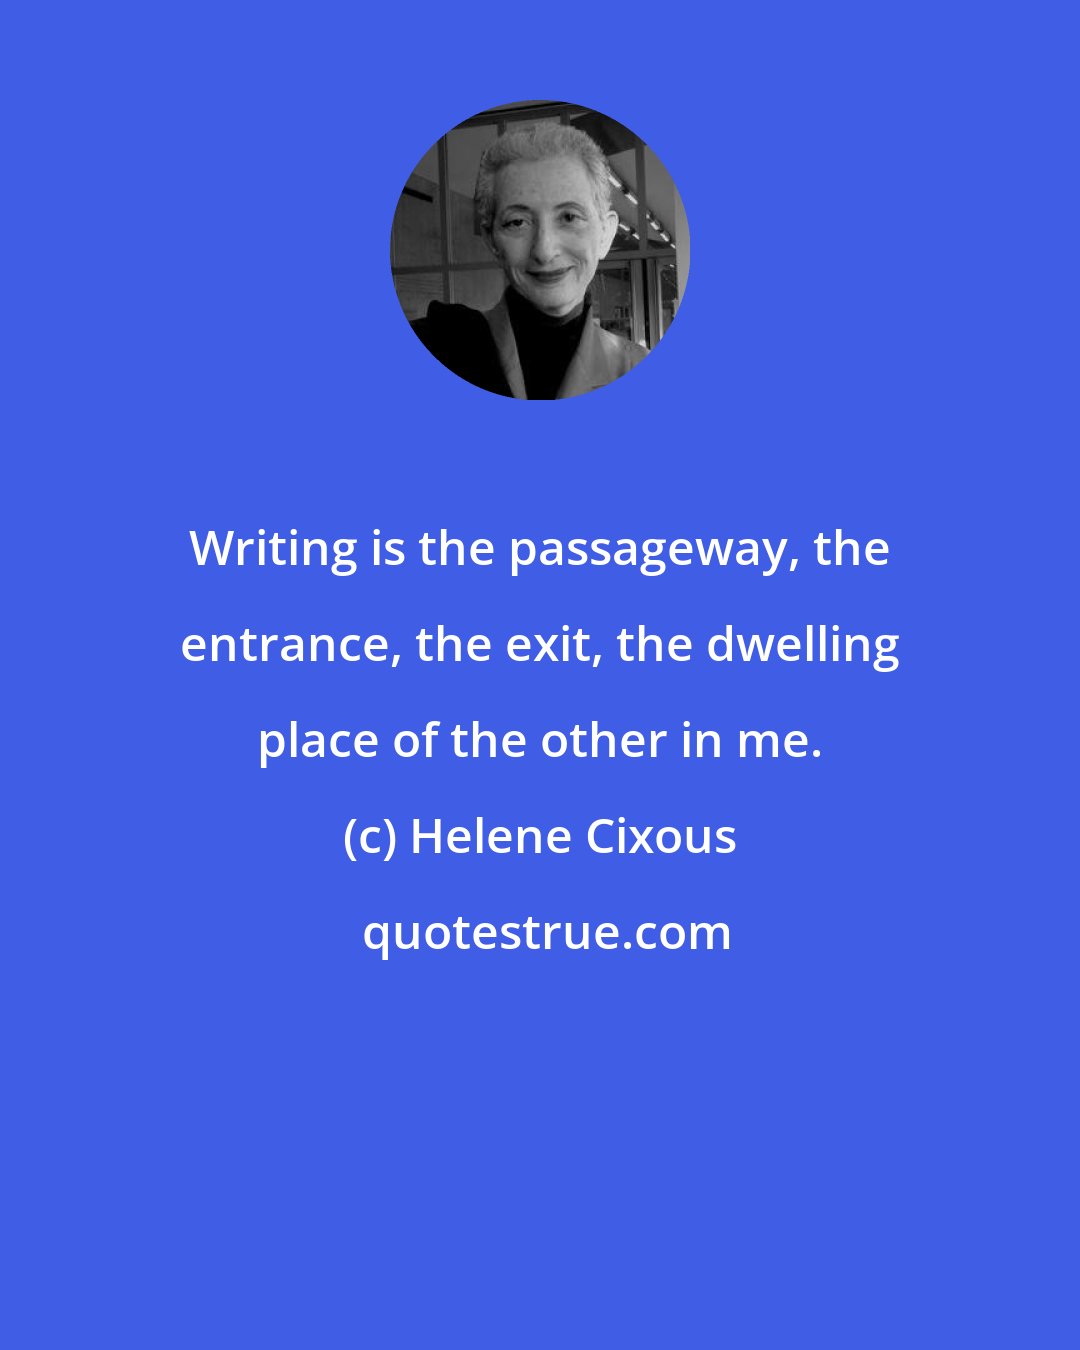 Helene Cixous: Writing is the passageway, the entrance, the exit, the dwelling place of the other in me.